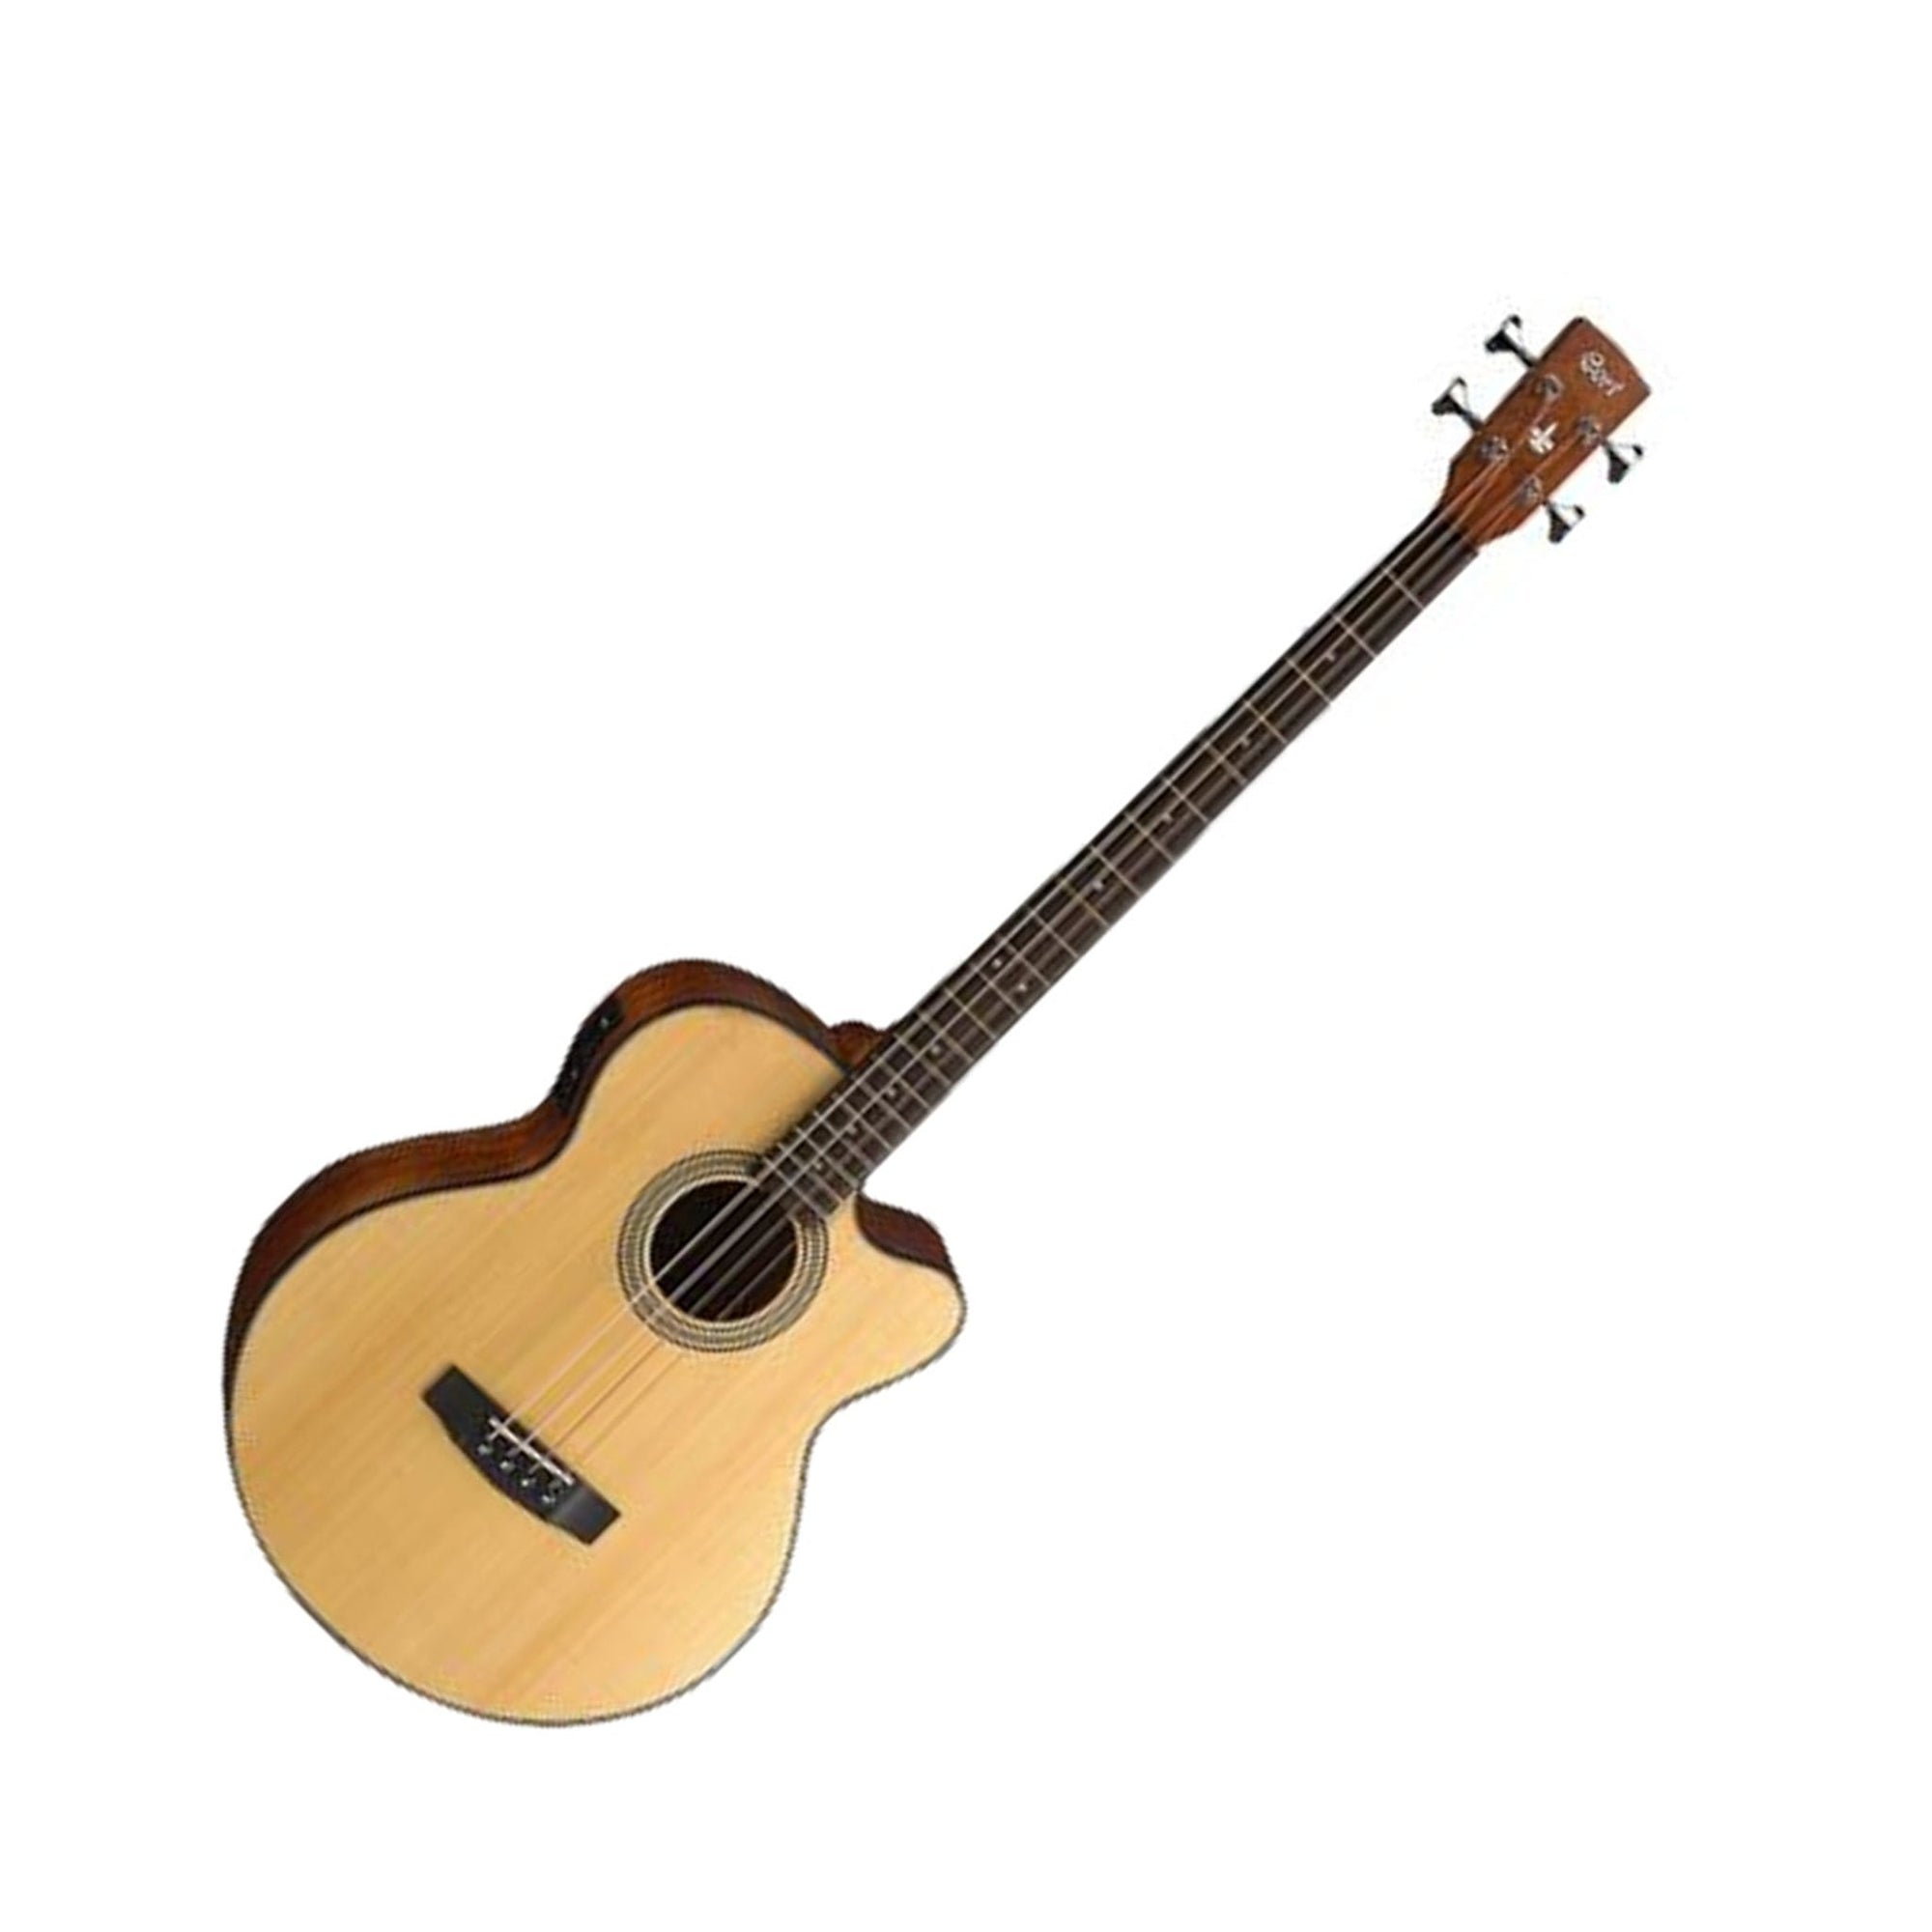 The Cort SJB5F 4-String Acoustic Bass Guitar features a deep jumbo body (depth of 110-135mm) to deliver a big natural acoustic sound with plenty of volume that will anchor the low-end in any musical setting.